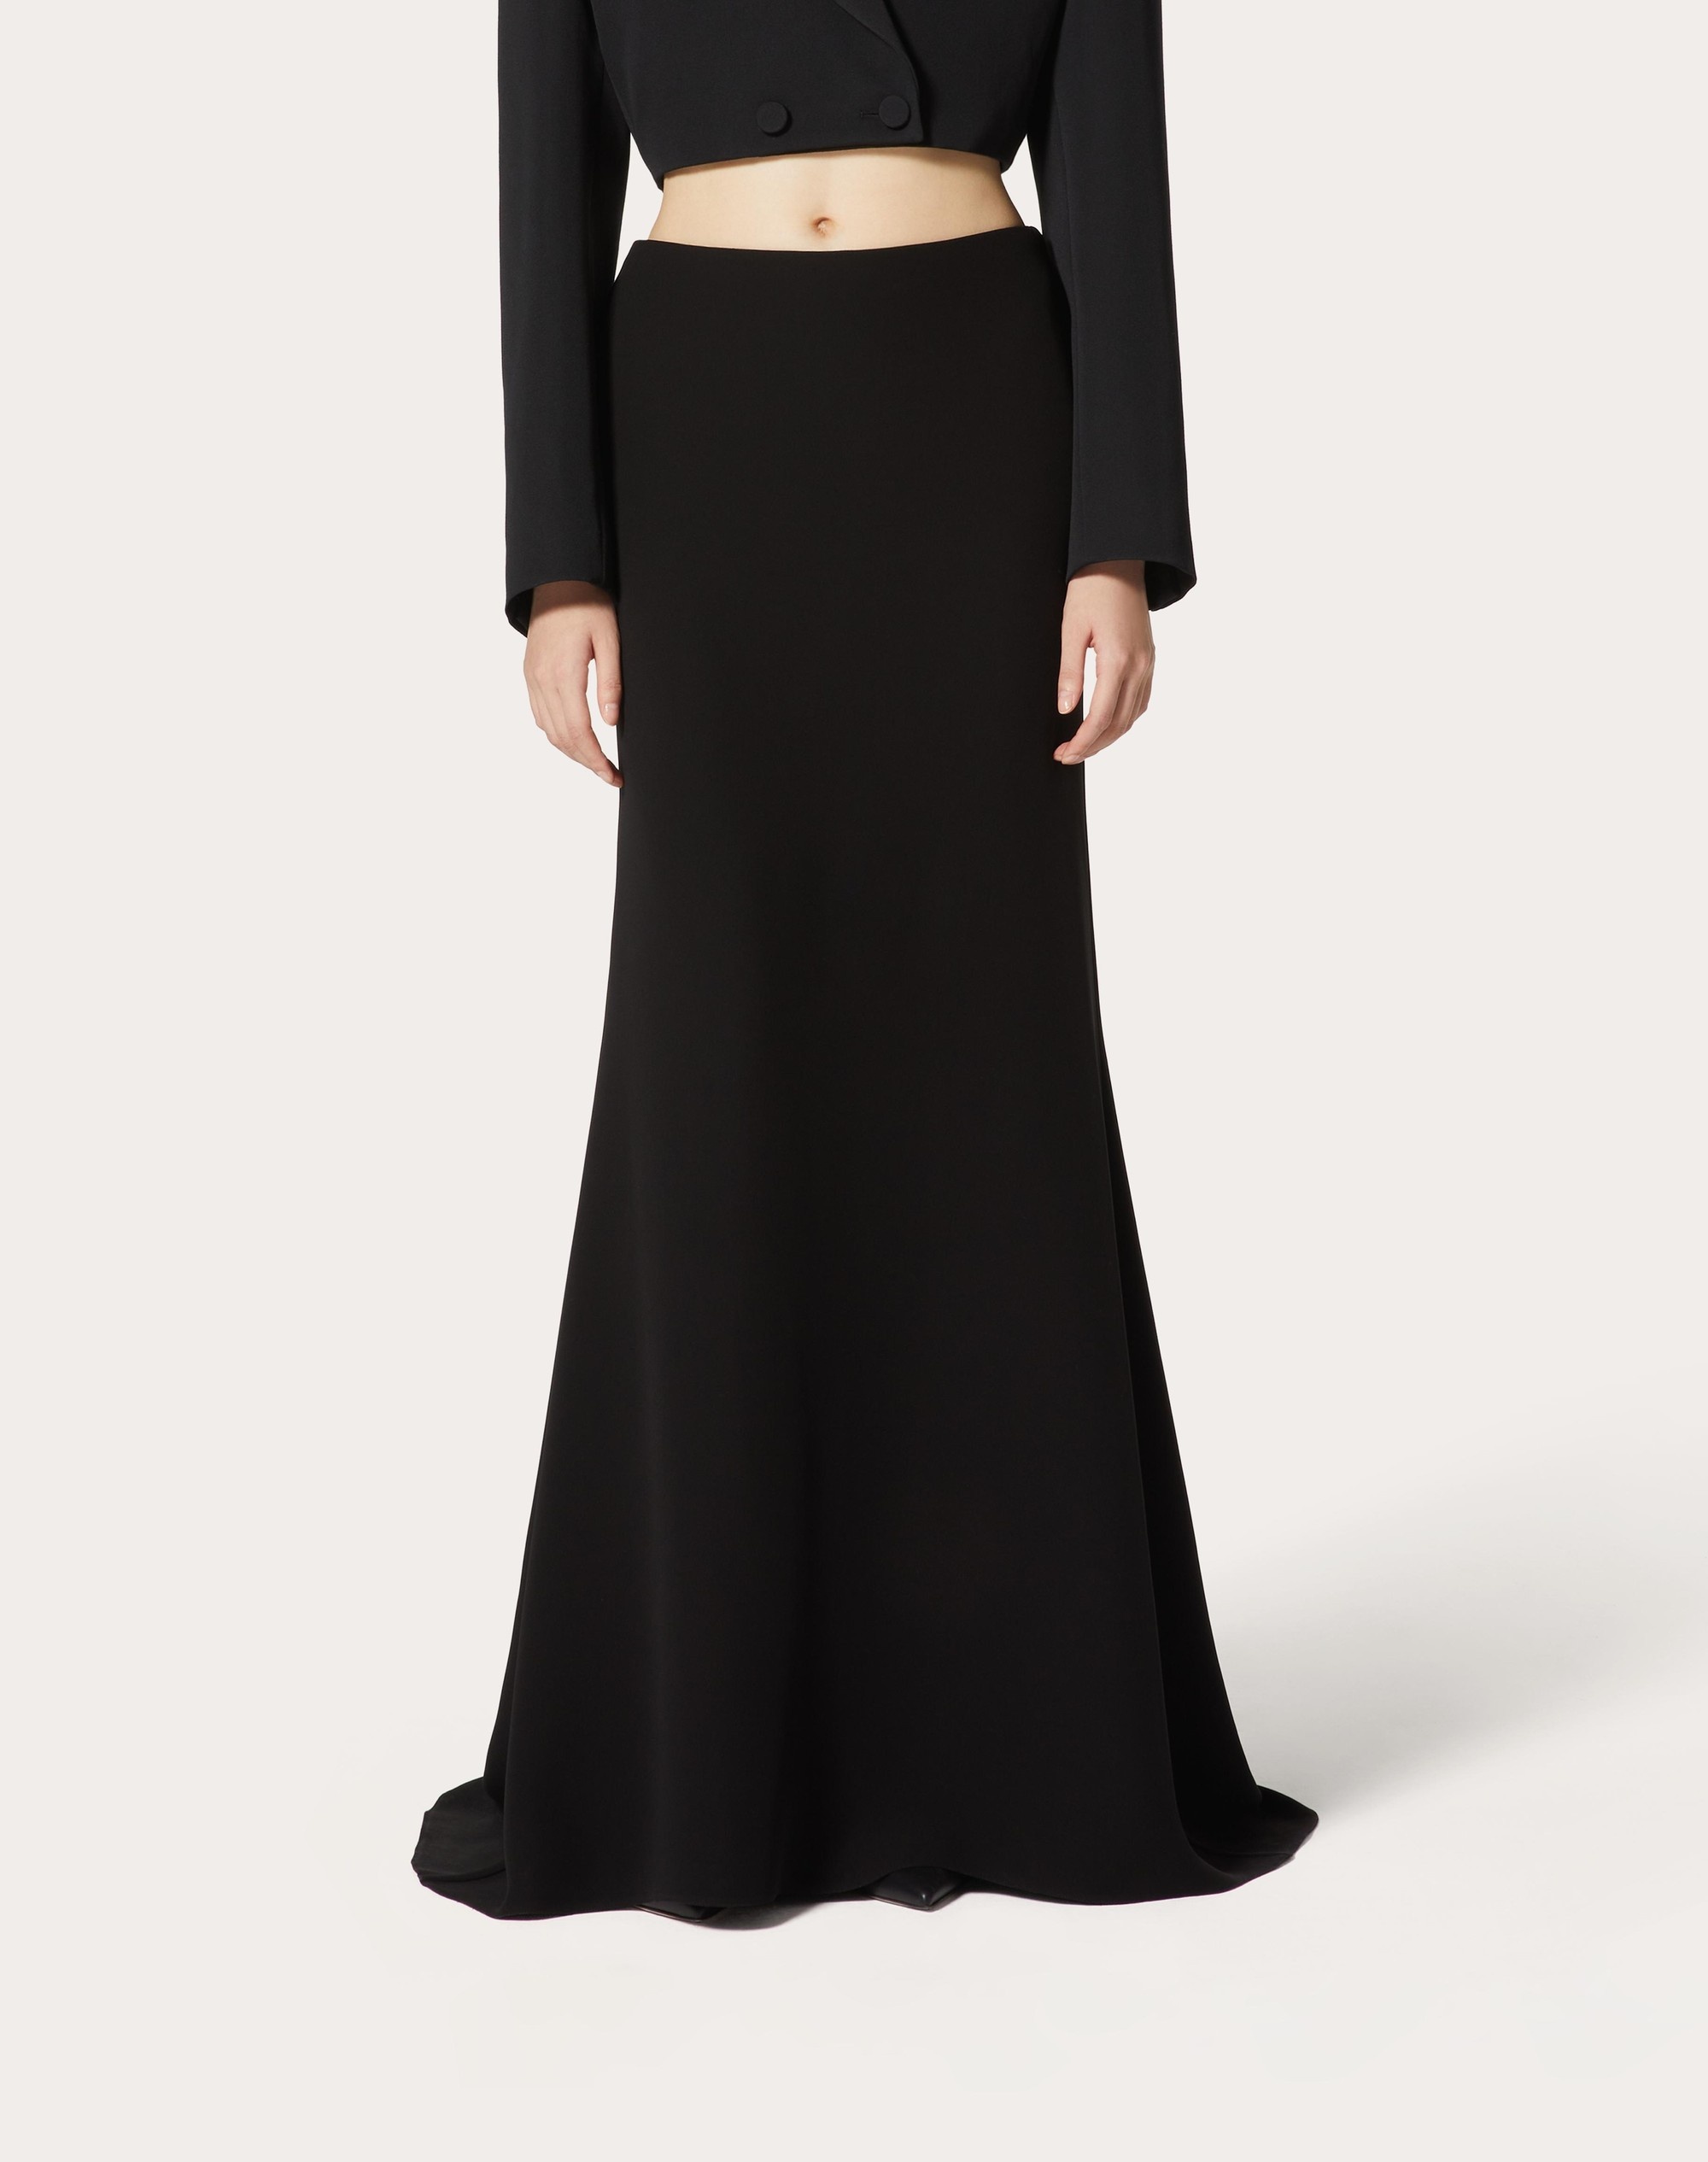 CADY COUTURE LONG SKIRT - 3